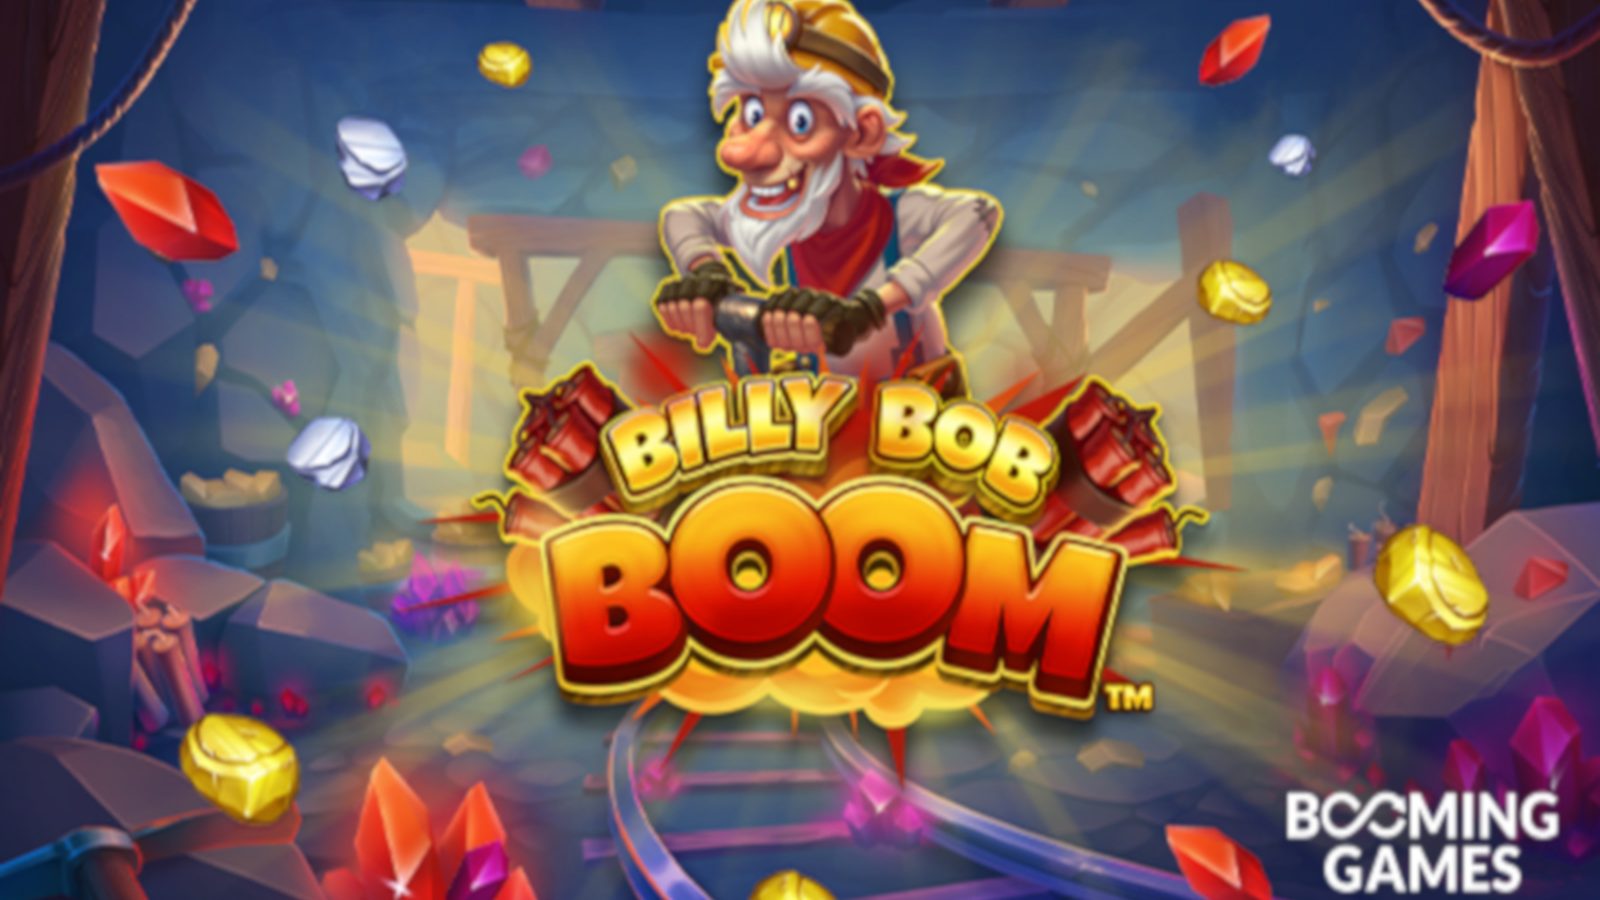 Explosive Wins with Billy Bob Boom Slot